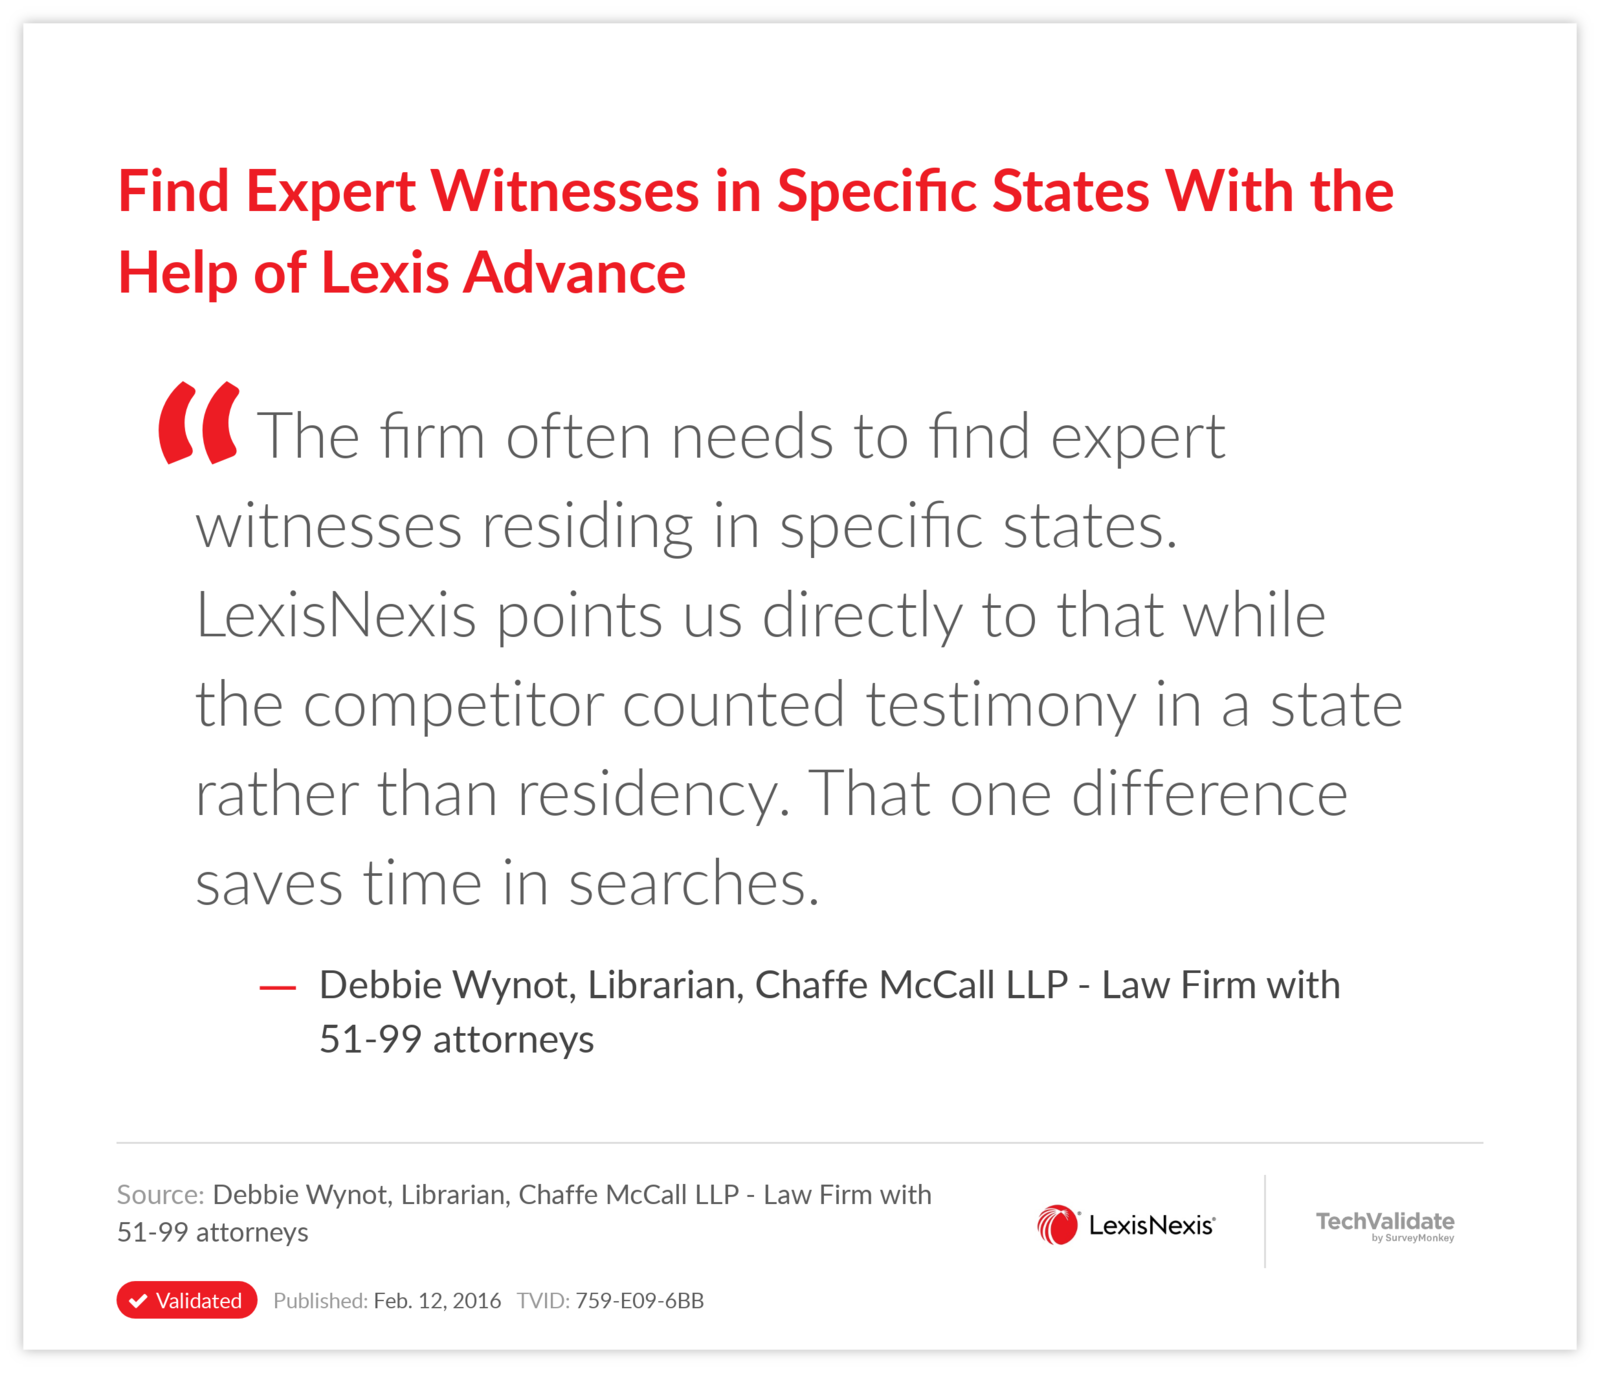 Find Expert Witnesses in Specific States With the Help of Lexis Advance